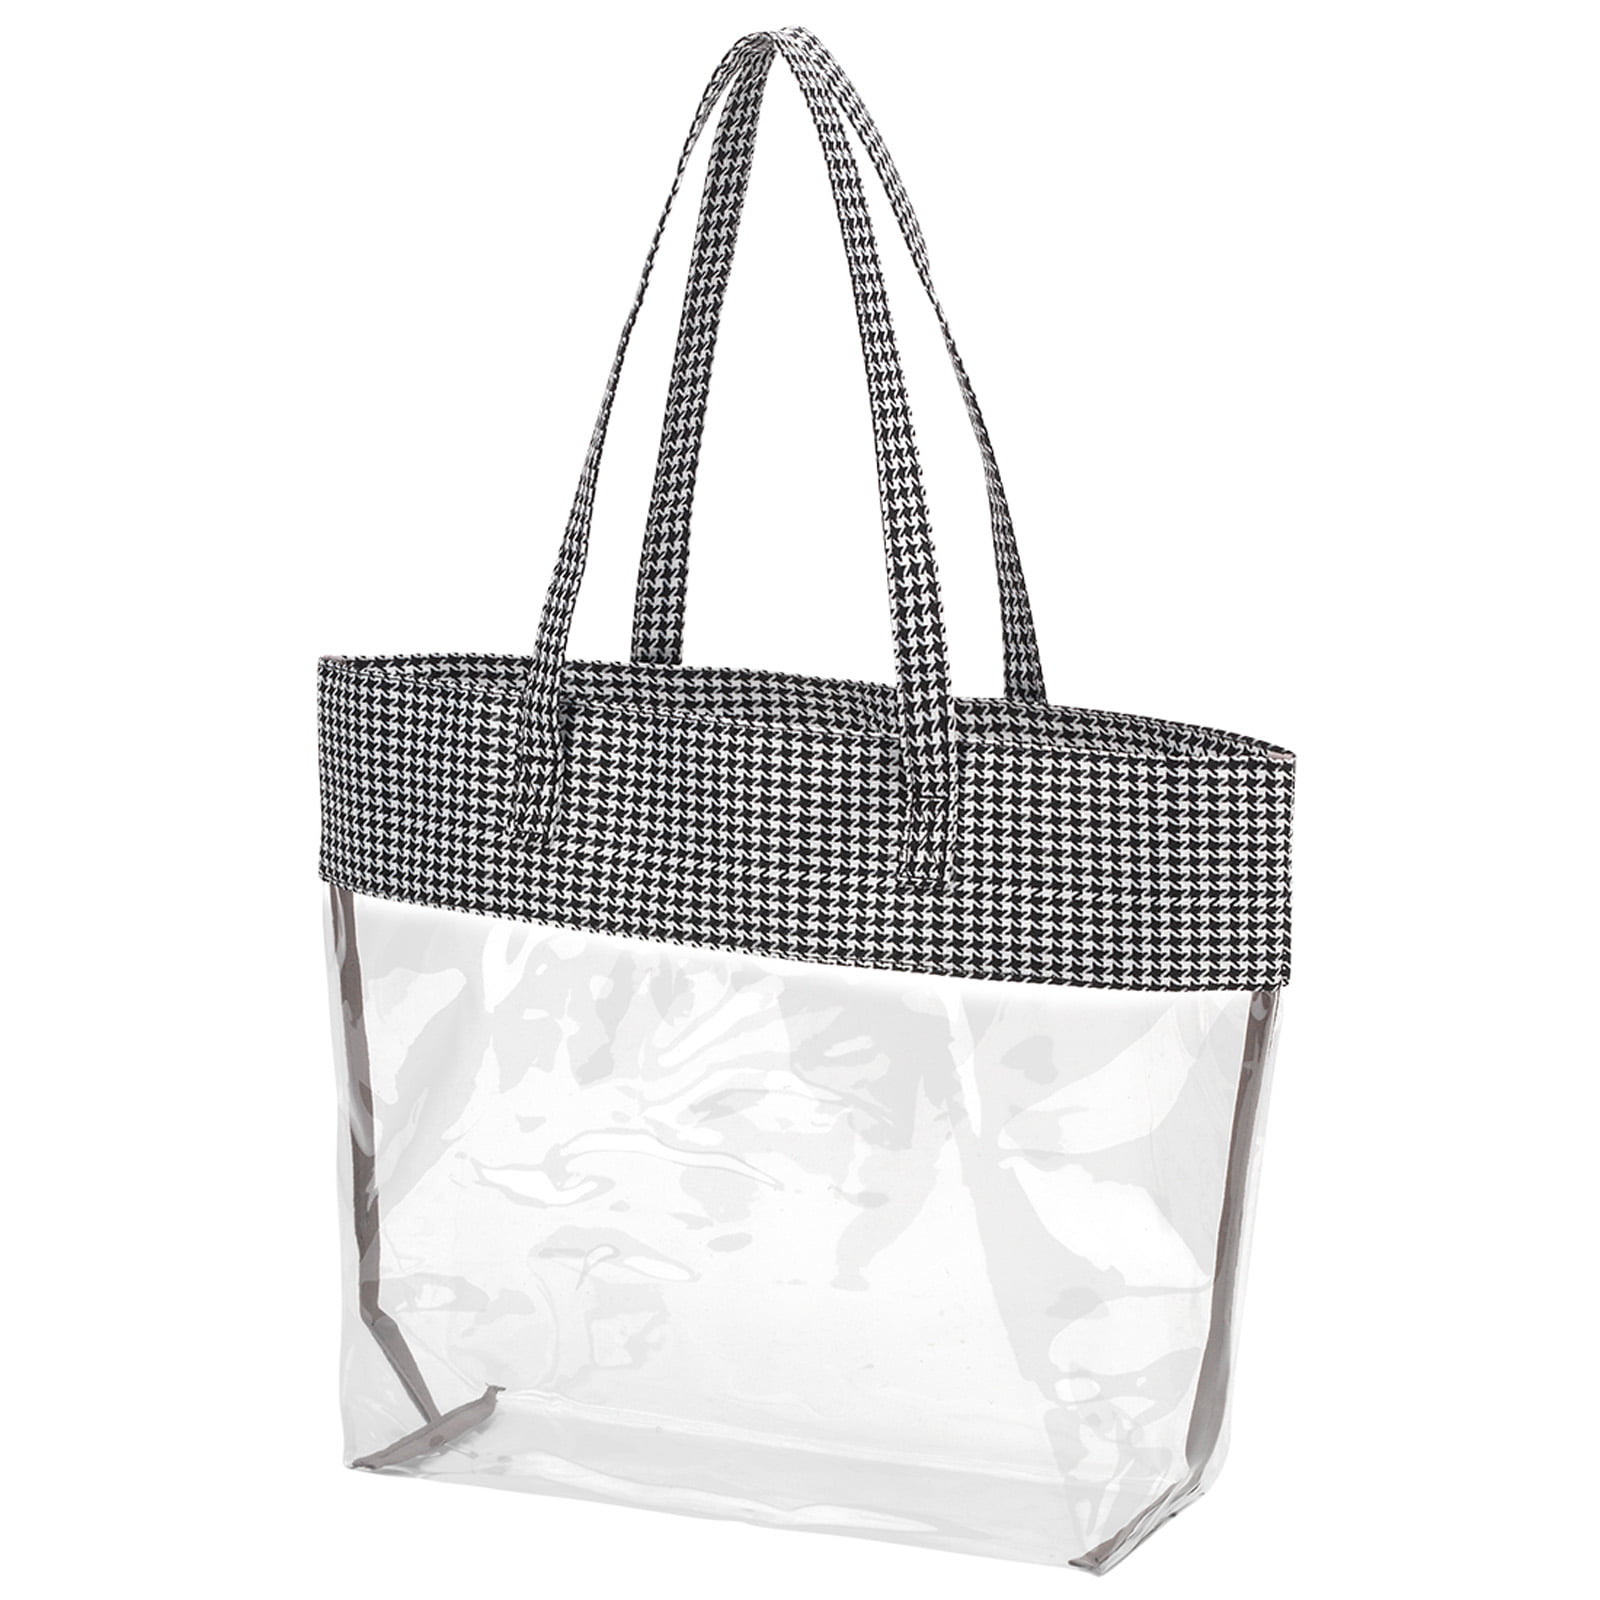 Viv and Lou Houndstooth Polyester and Clear Stadium Tote Bag - 0 - 0